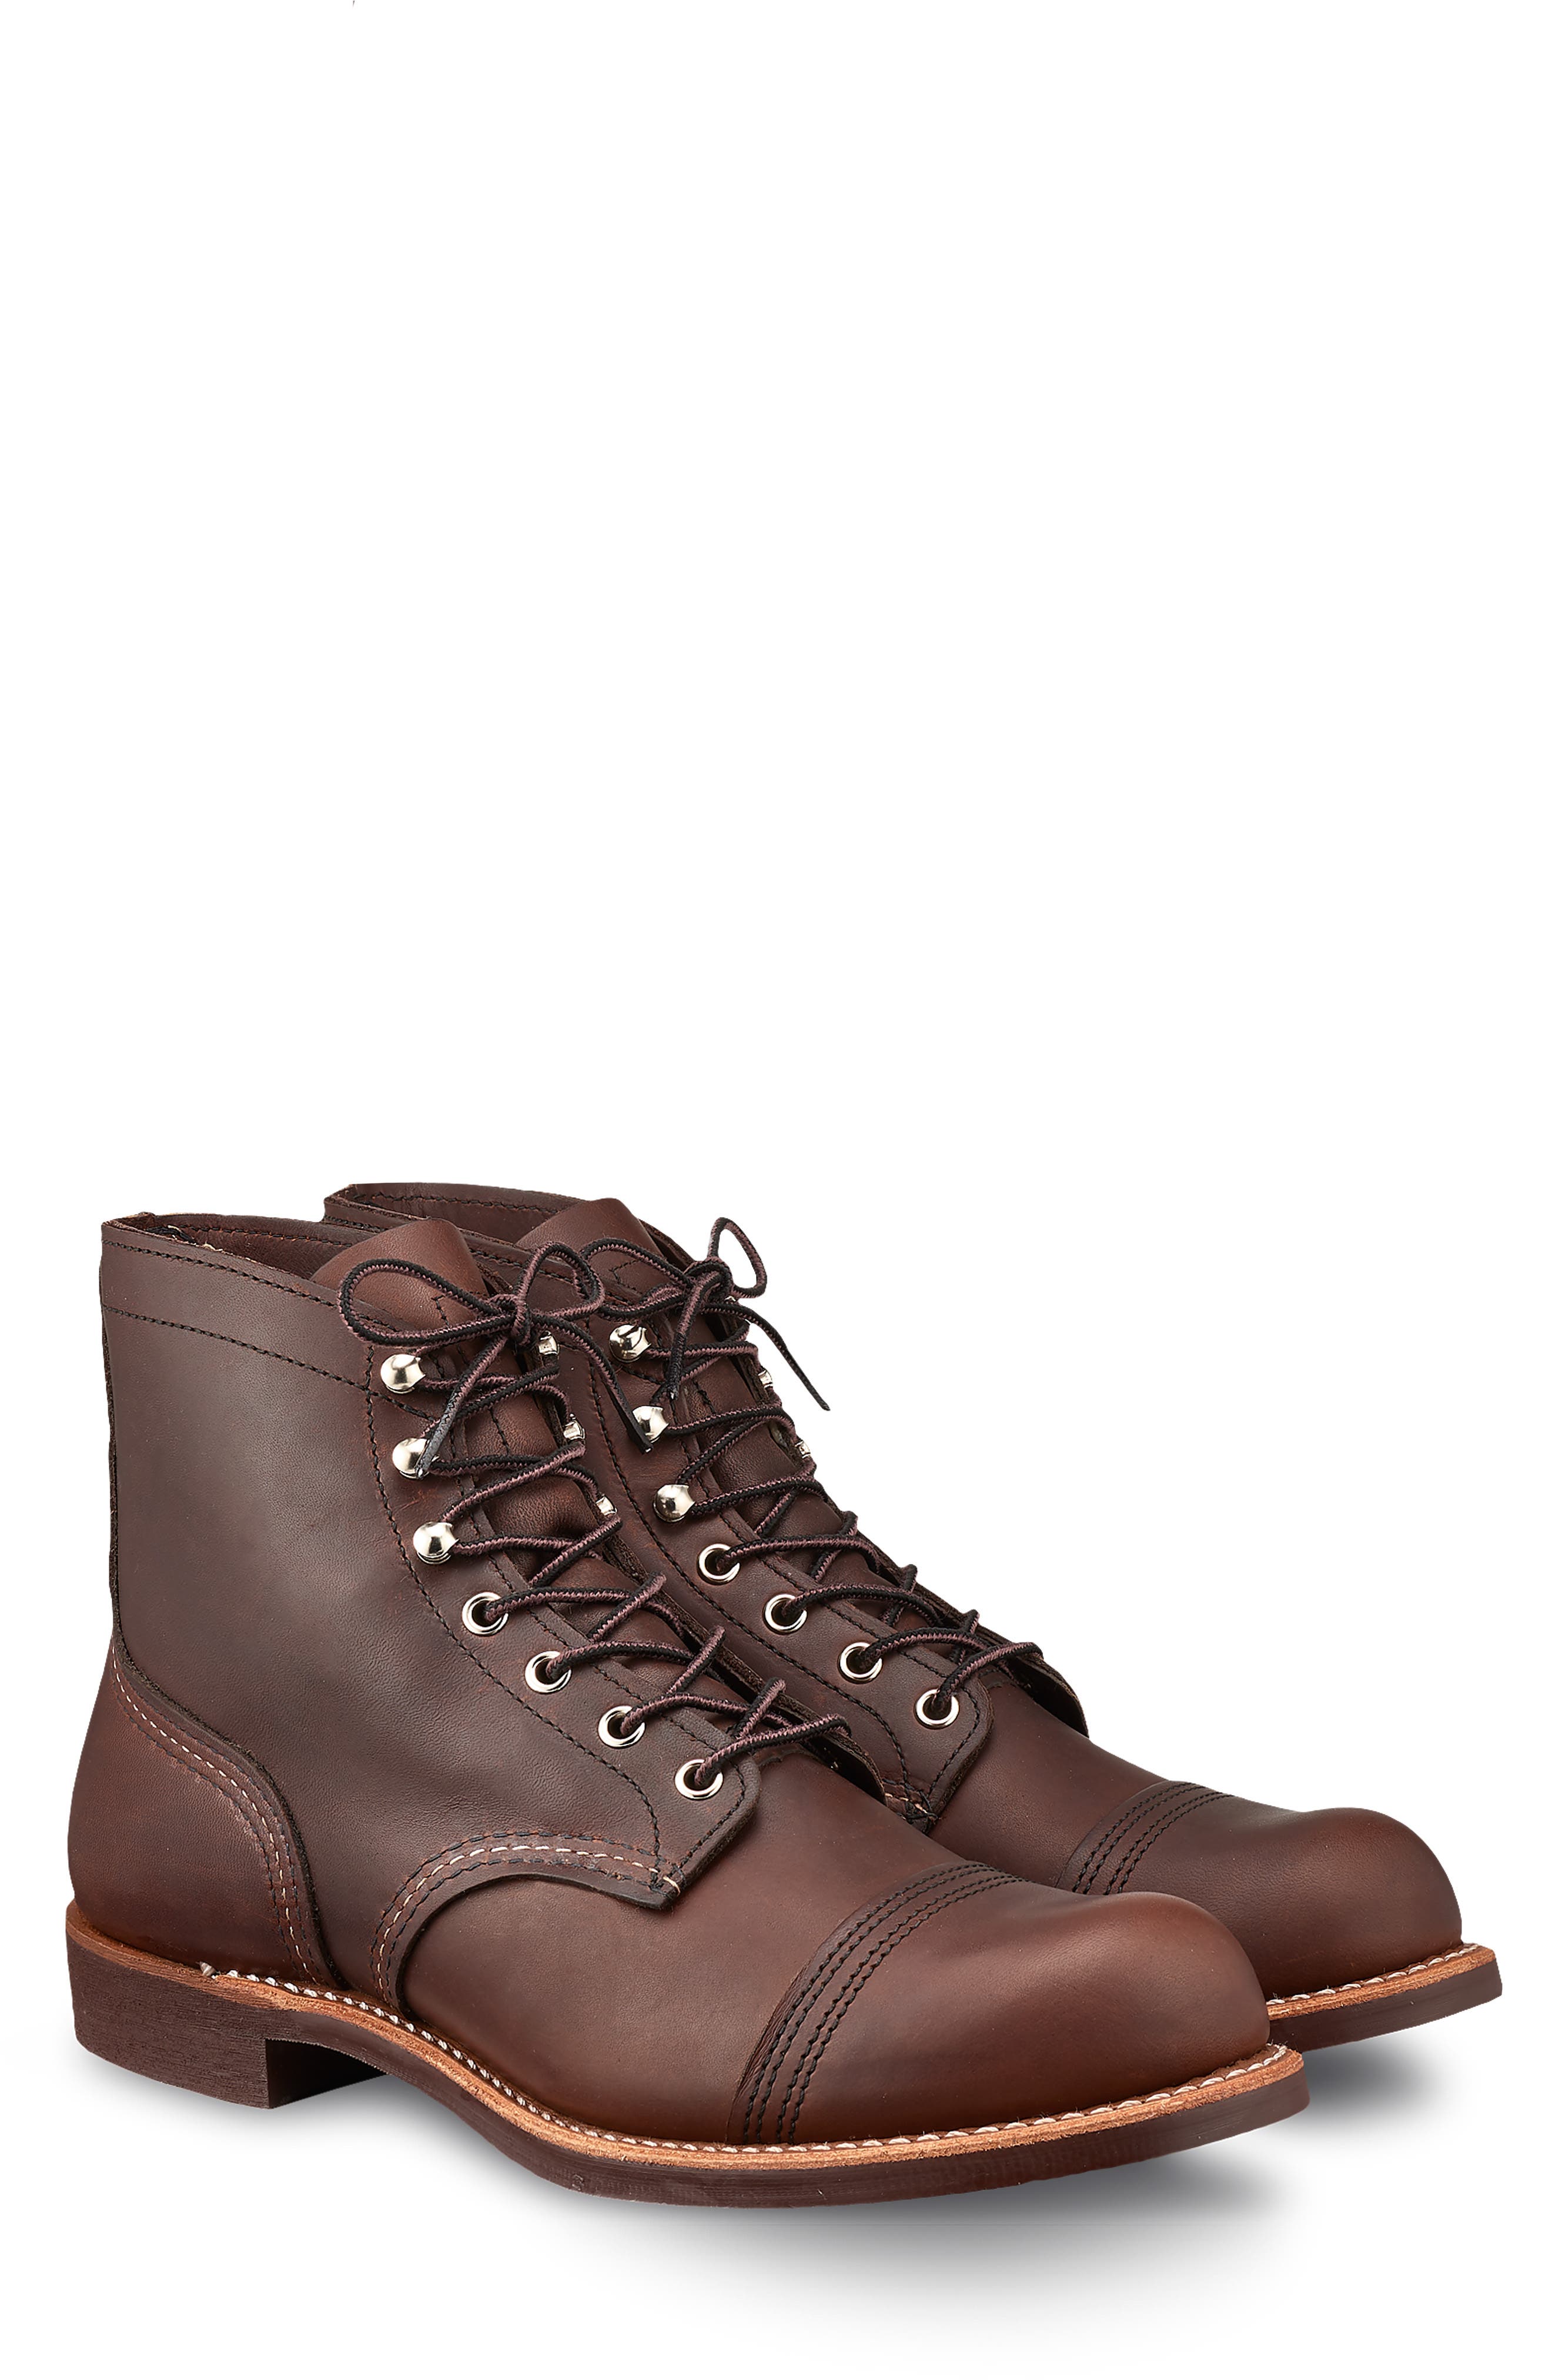 red wing boots toe cap